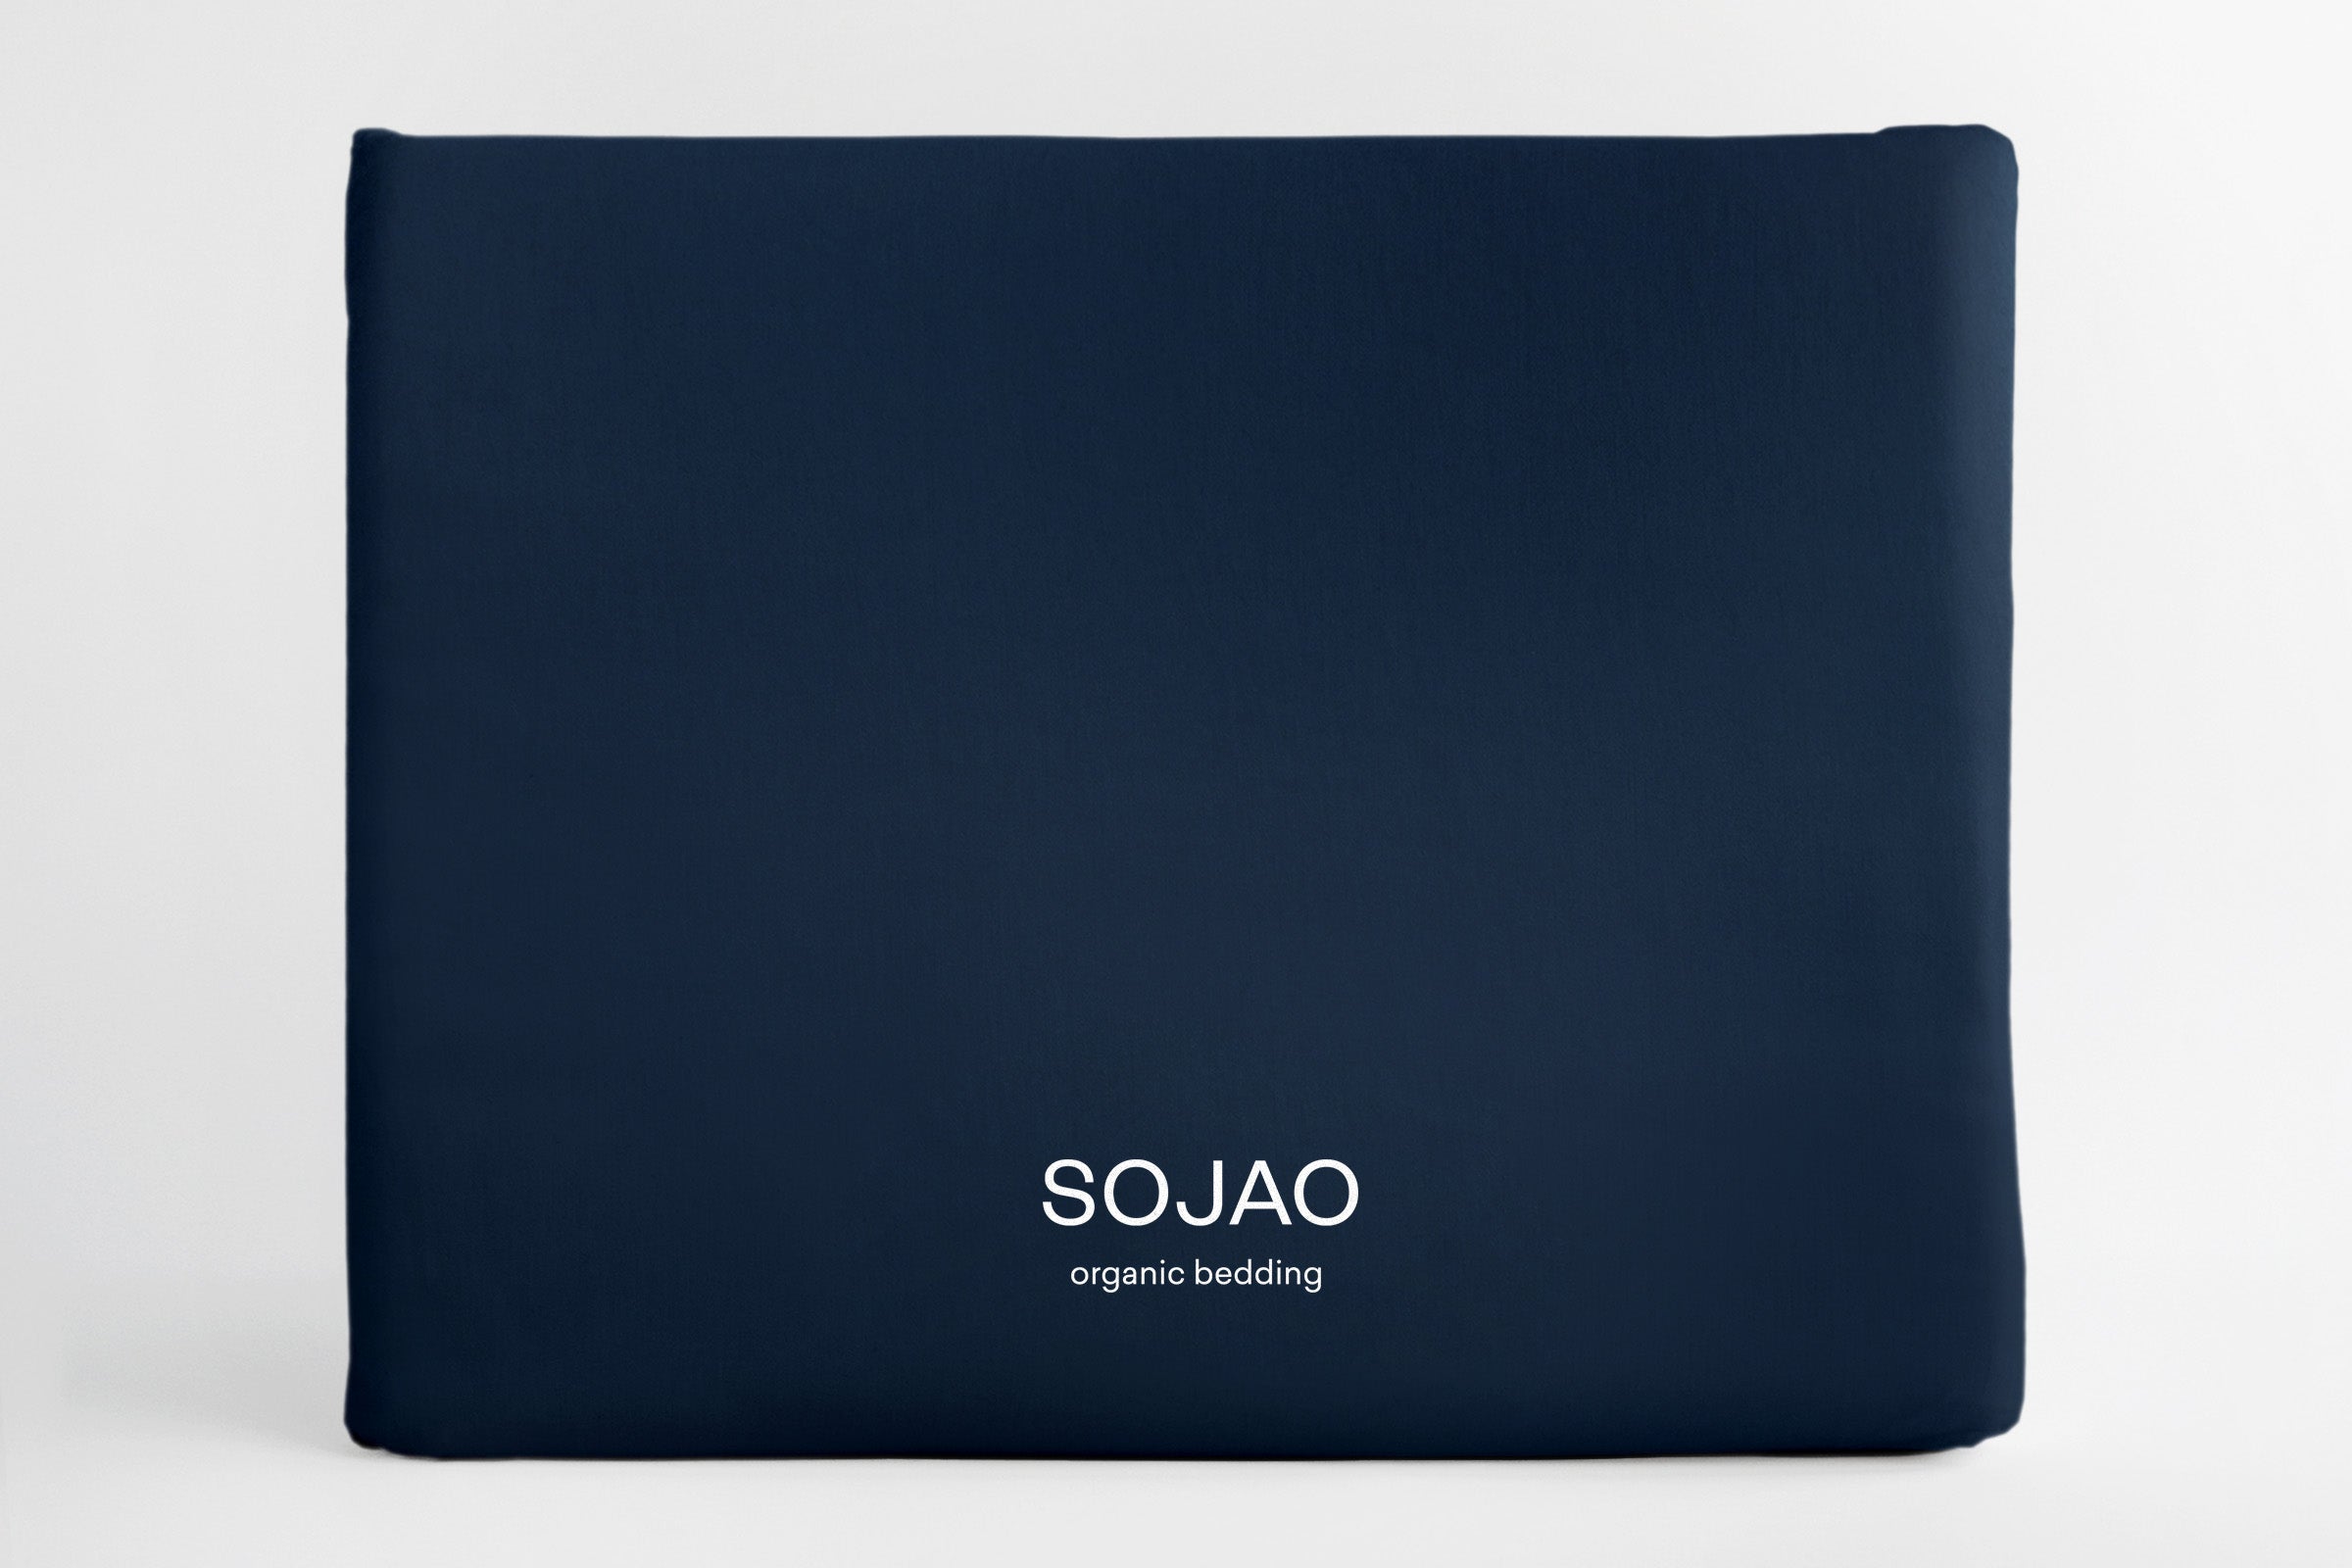 classic-navy-body-pillow-case-dust-bag-by-sojao.jpg